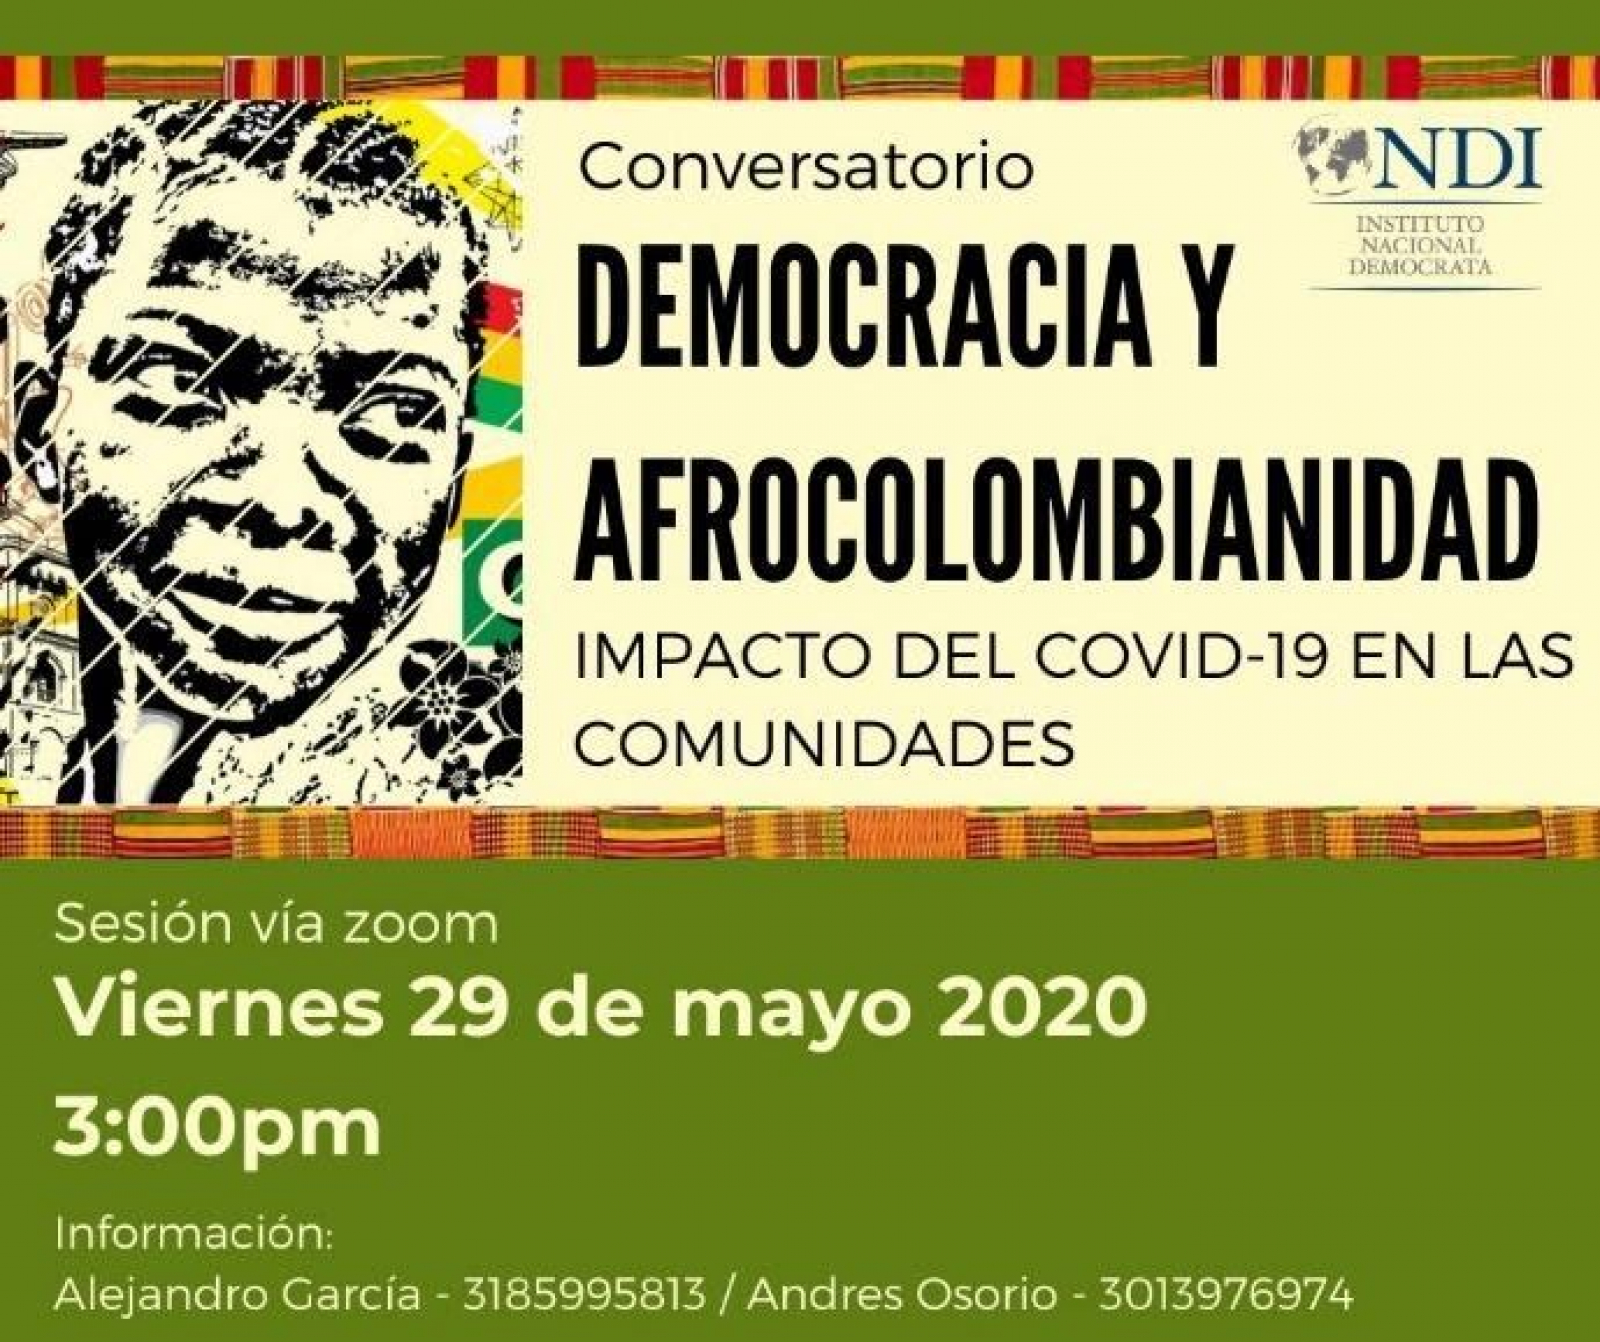 Improving Outreach to Underrepresented Communities in Colombia During COVID-19